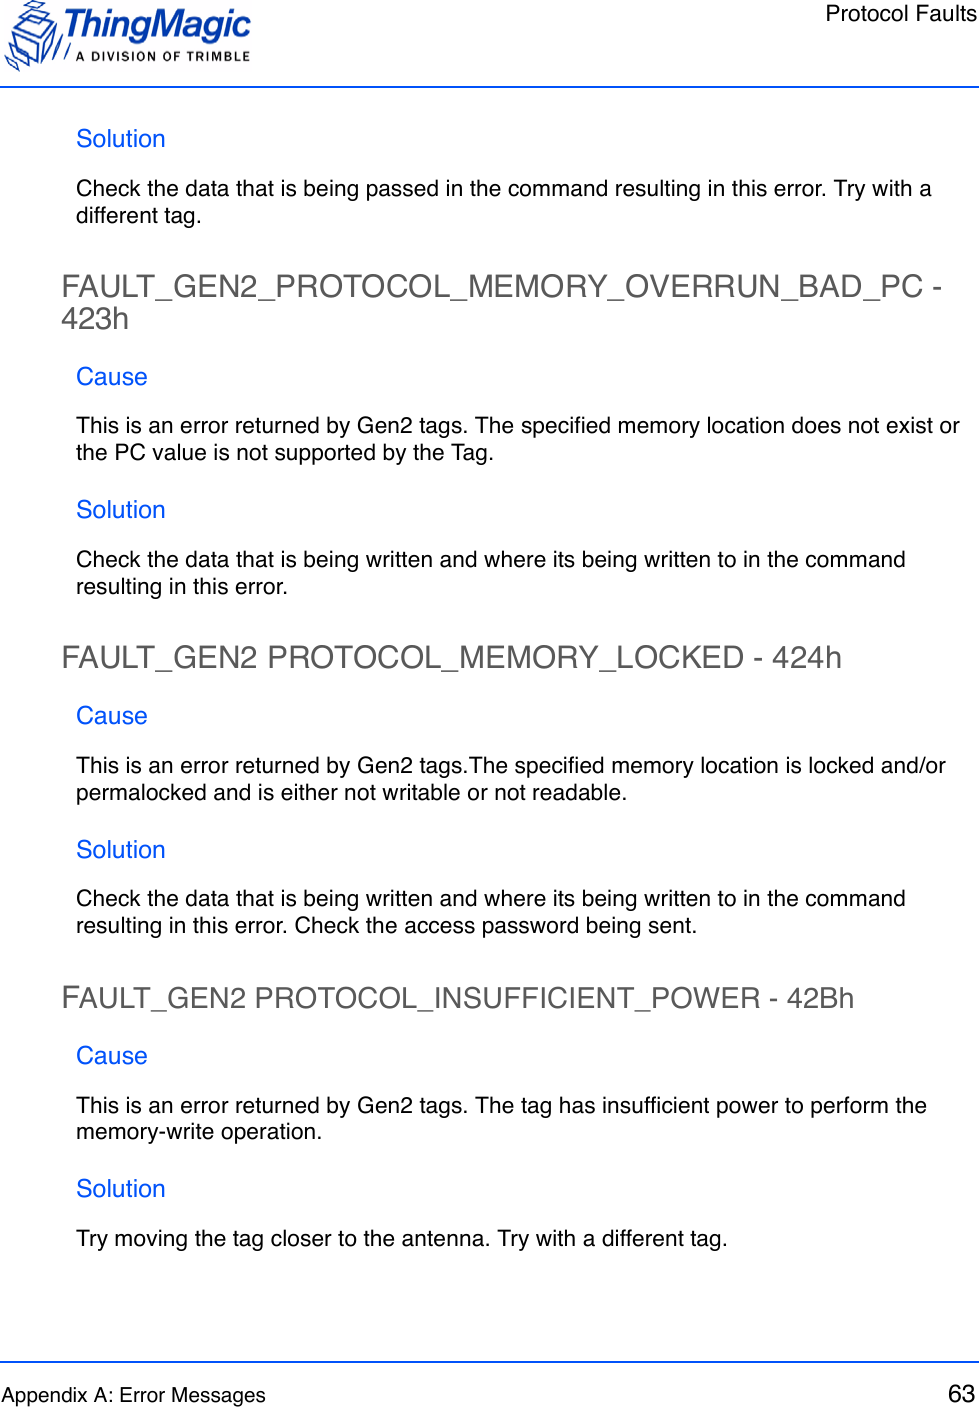 Protocol FaultsAppendix A: Error Messages 63SolutionCheck the data that is being passed in the command resulting in this error. Try with a different tag.FAULT_GEN2_PROTOCOL_MEMORY_OVERRUN_BAD_PC - 423hCauseThis is an error returned by Gen2 tags. The specified memory location does not exist or the PC value is not supported by the Tag. SolutionCheck the data that is being written and where its being written to in the command resulting in this error.FAULT_GEN2 PROTOCOL_MEMORY_LOCKED - 424hCauseThis is an error returned by Gen2 tags.The specified memory location is locked and/or permalocked and is either not writable or not readable.SolutionCheck the data that is being written and where its being written to in the command resulting in this error. Check the access password being sent.FAULT_GEN2 PROTOCOL_INSUFFICIENT_POWER - 42BhCauseThis is an error returned by Gen2 tags. The tag has insufficient power to perform the memory-write operation.SolutionTry moving the tag closer to the antenna. Try with a different tag.